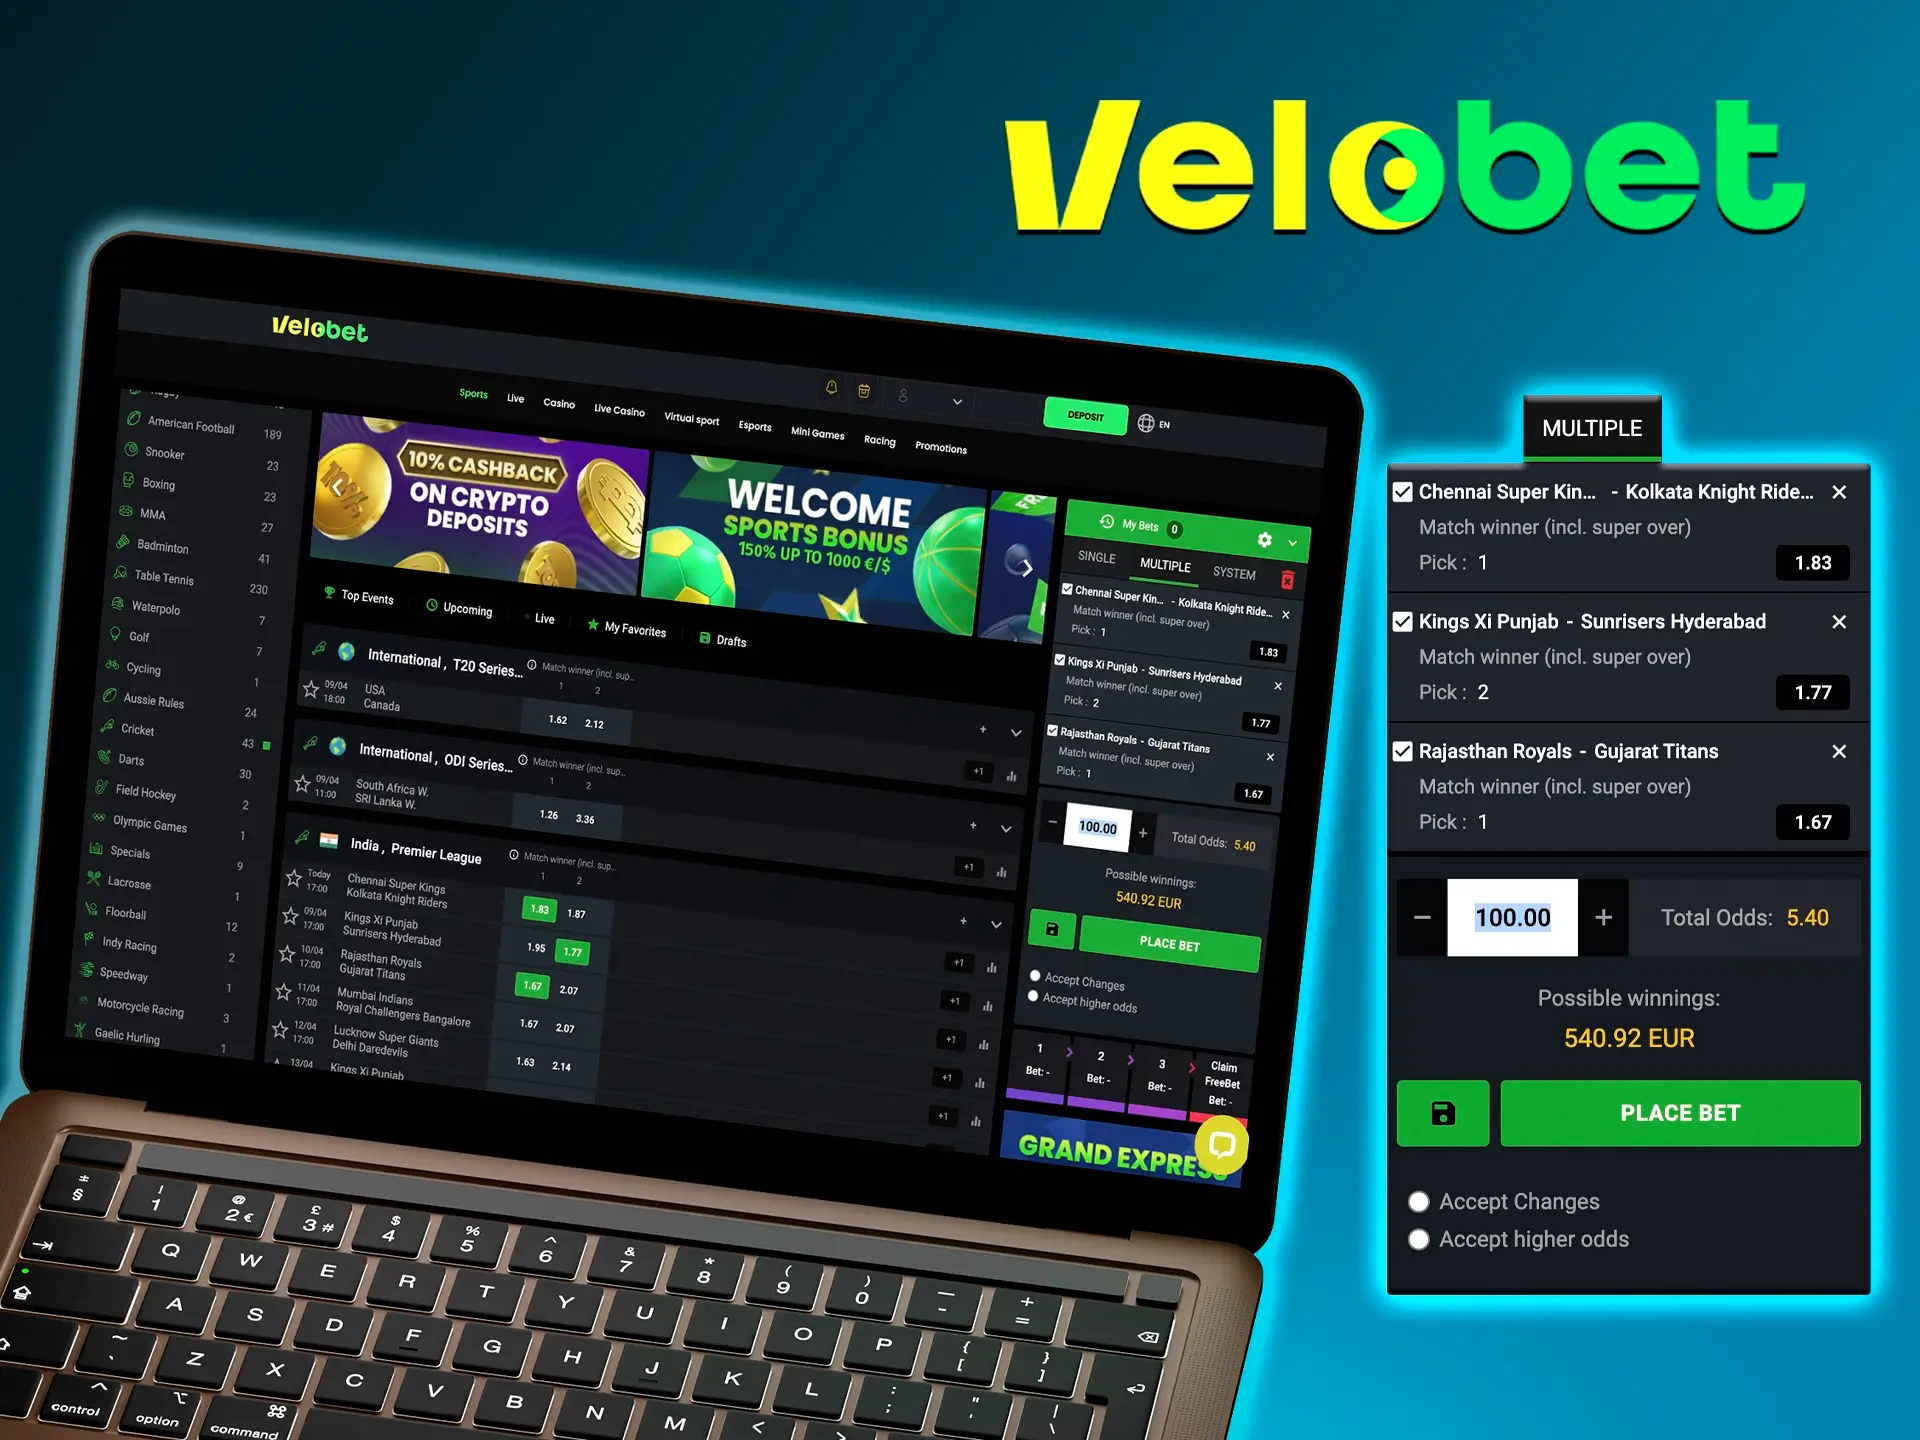 Show your skill when betting on express at Velobet, as it gives the biggest winnings if you win.